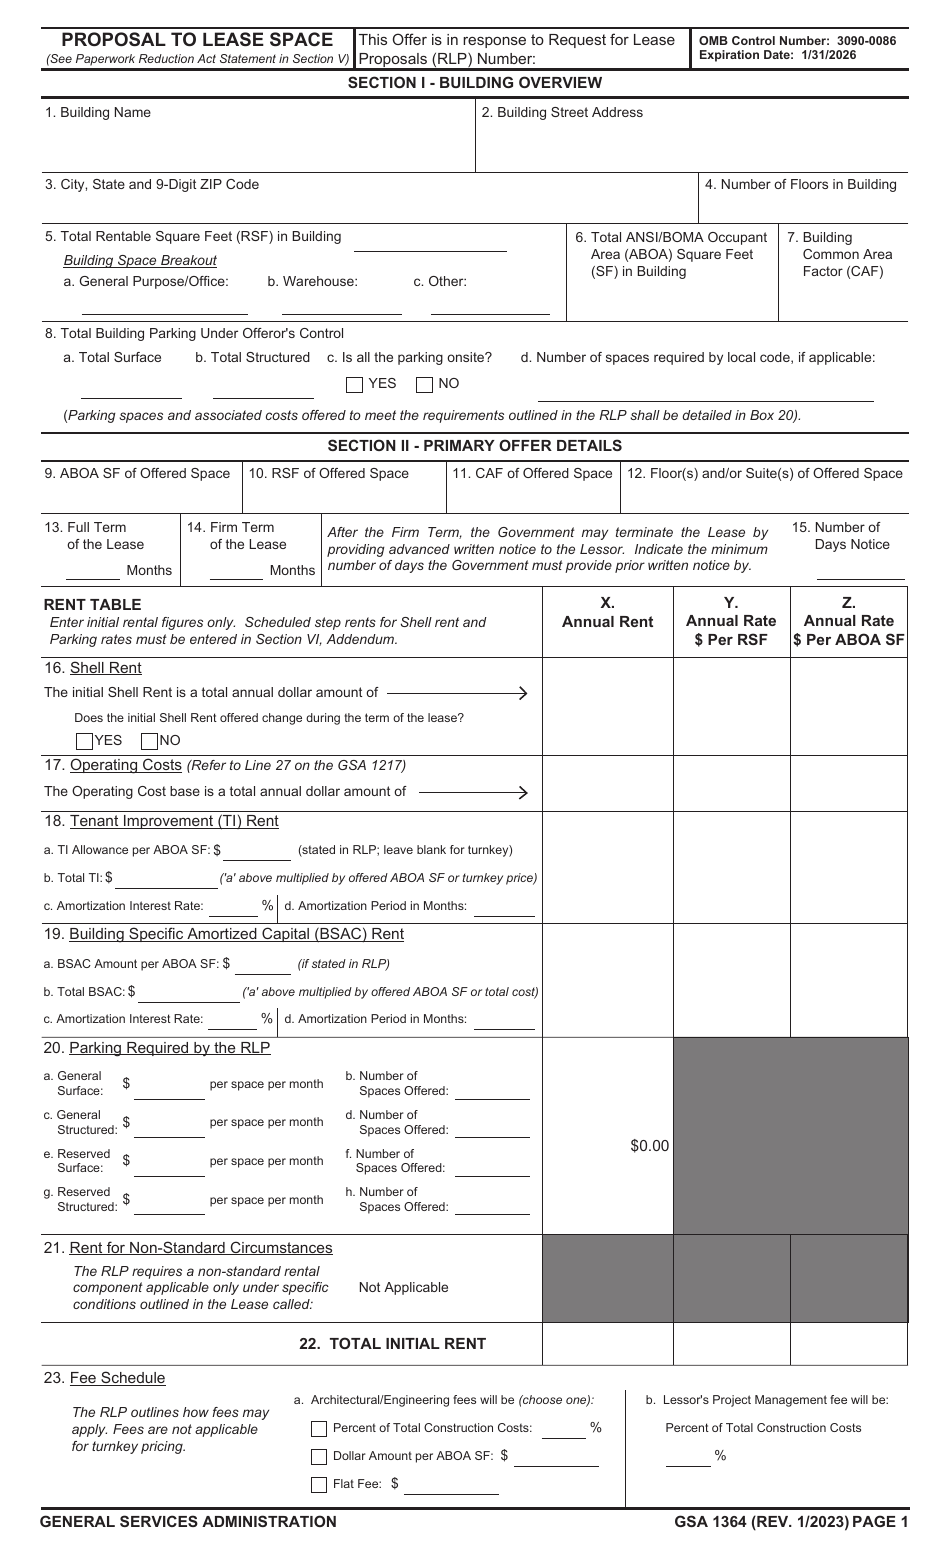 GSA Form 1364 Proposal to Lease Space, Page 1